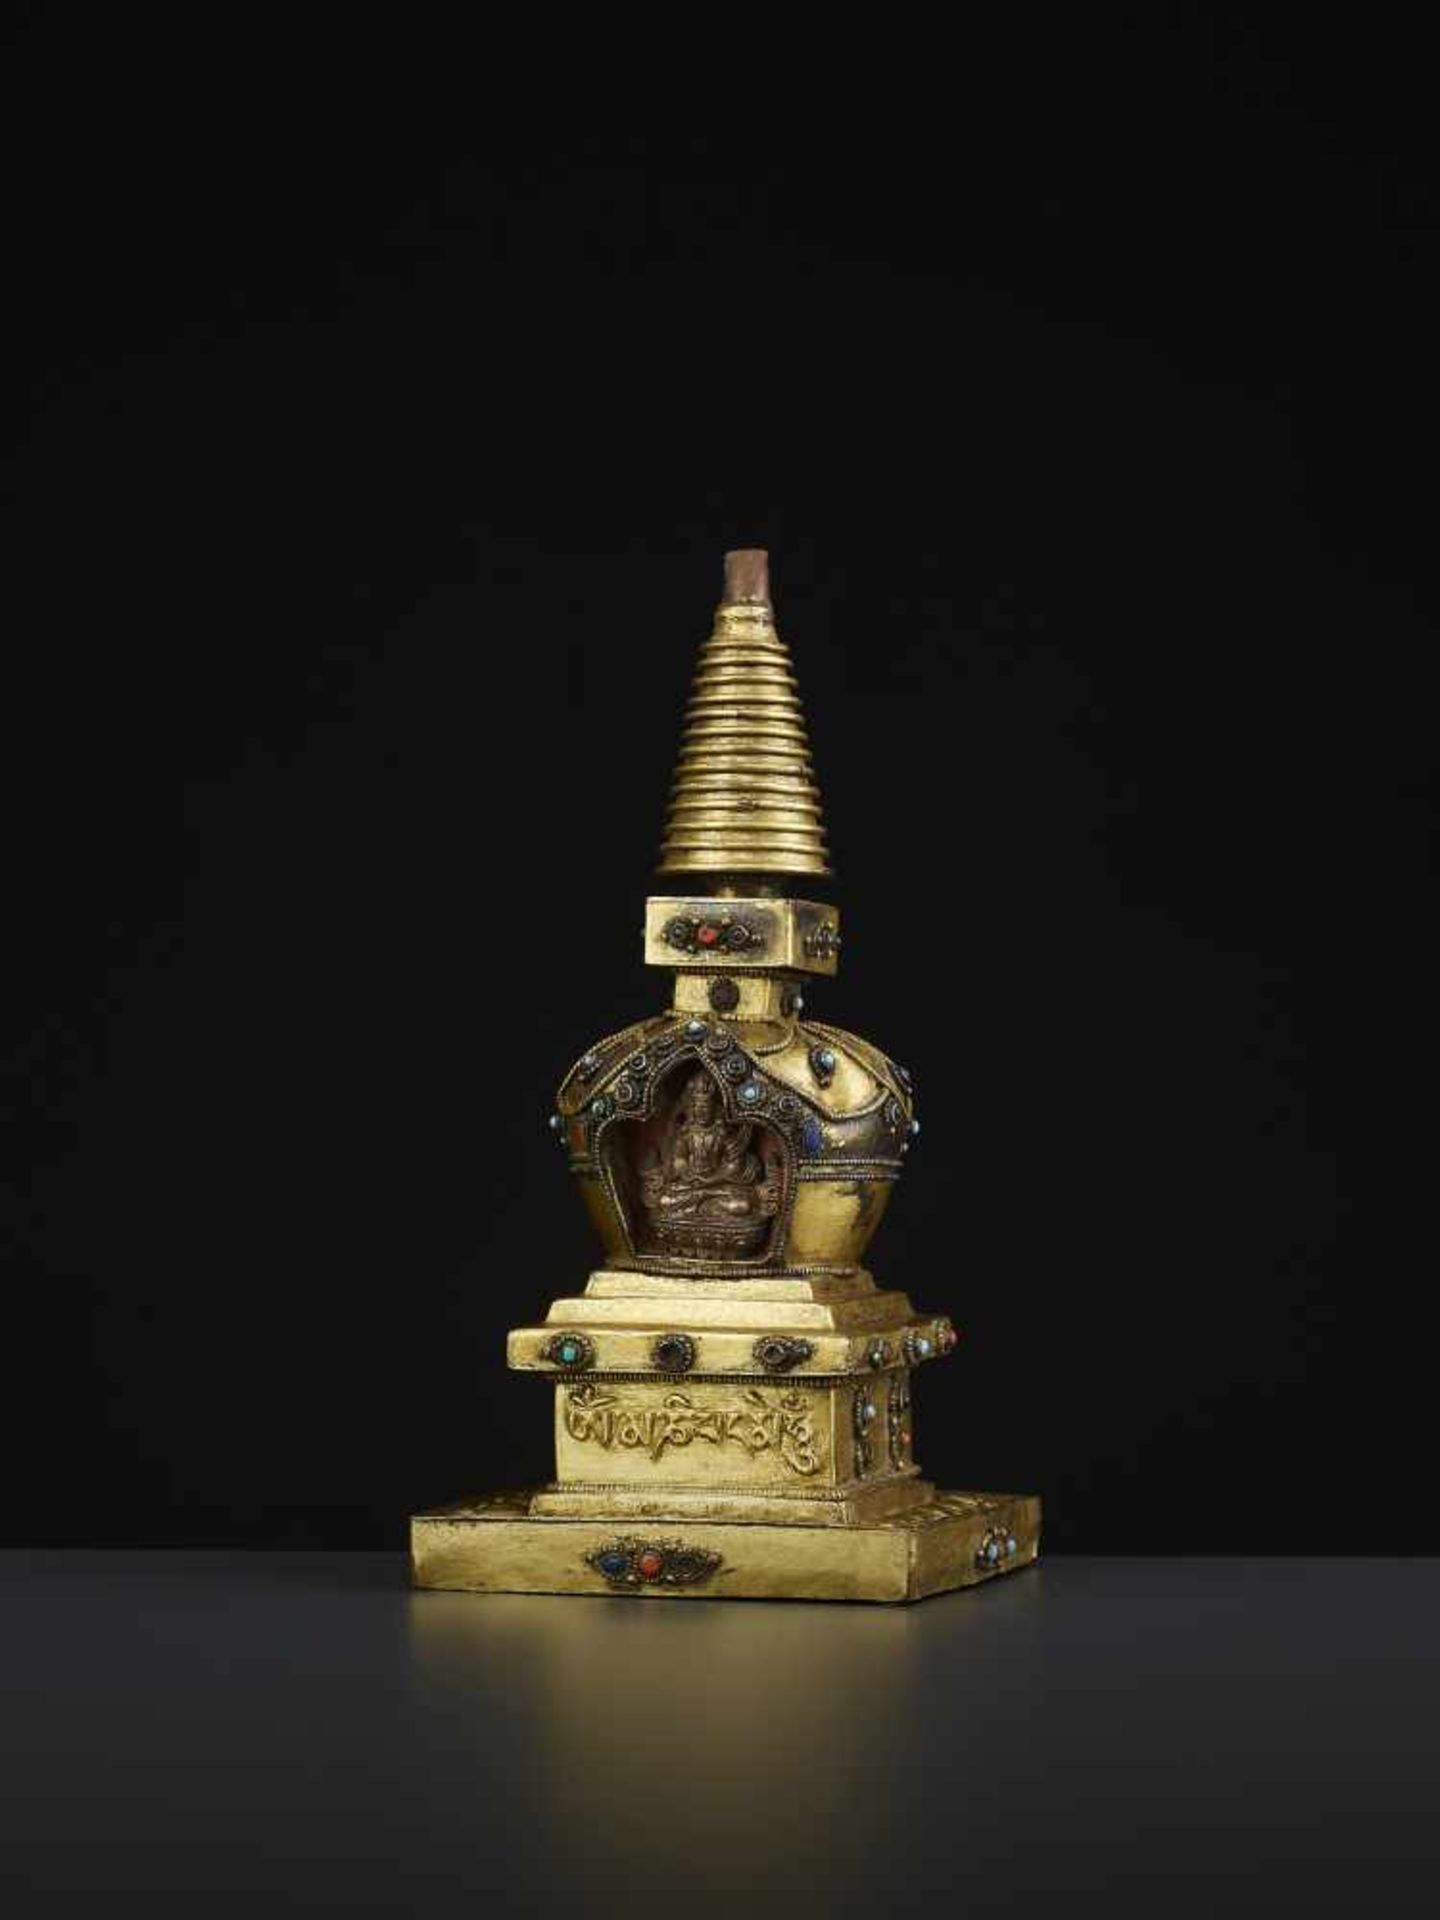 A REPOUSSE STUPA 18TH CENTURYTibet, 18TH to earlier 19TH century. A fire-gilt copper model of a